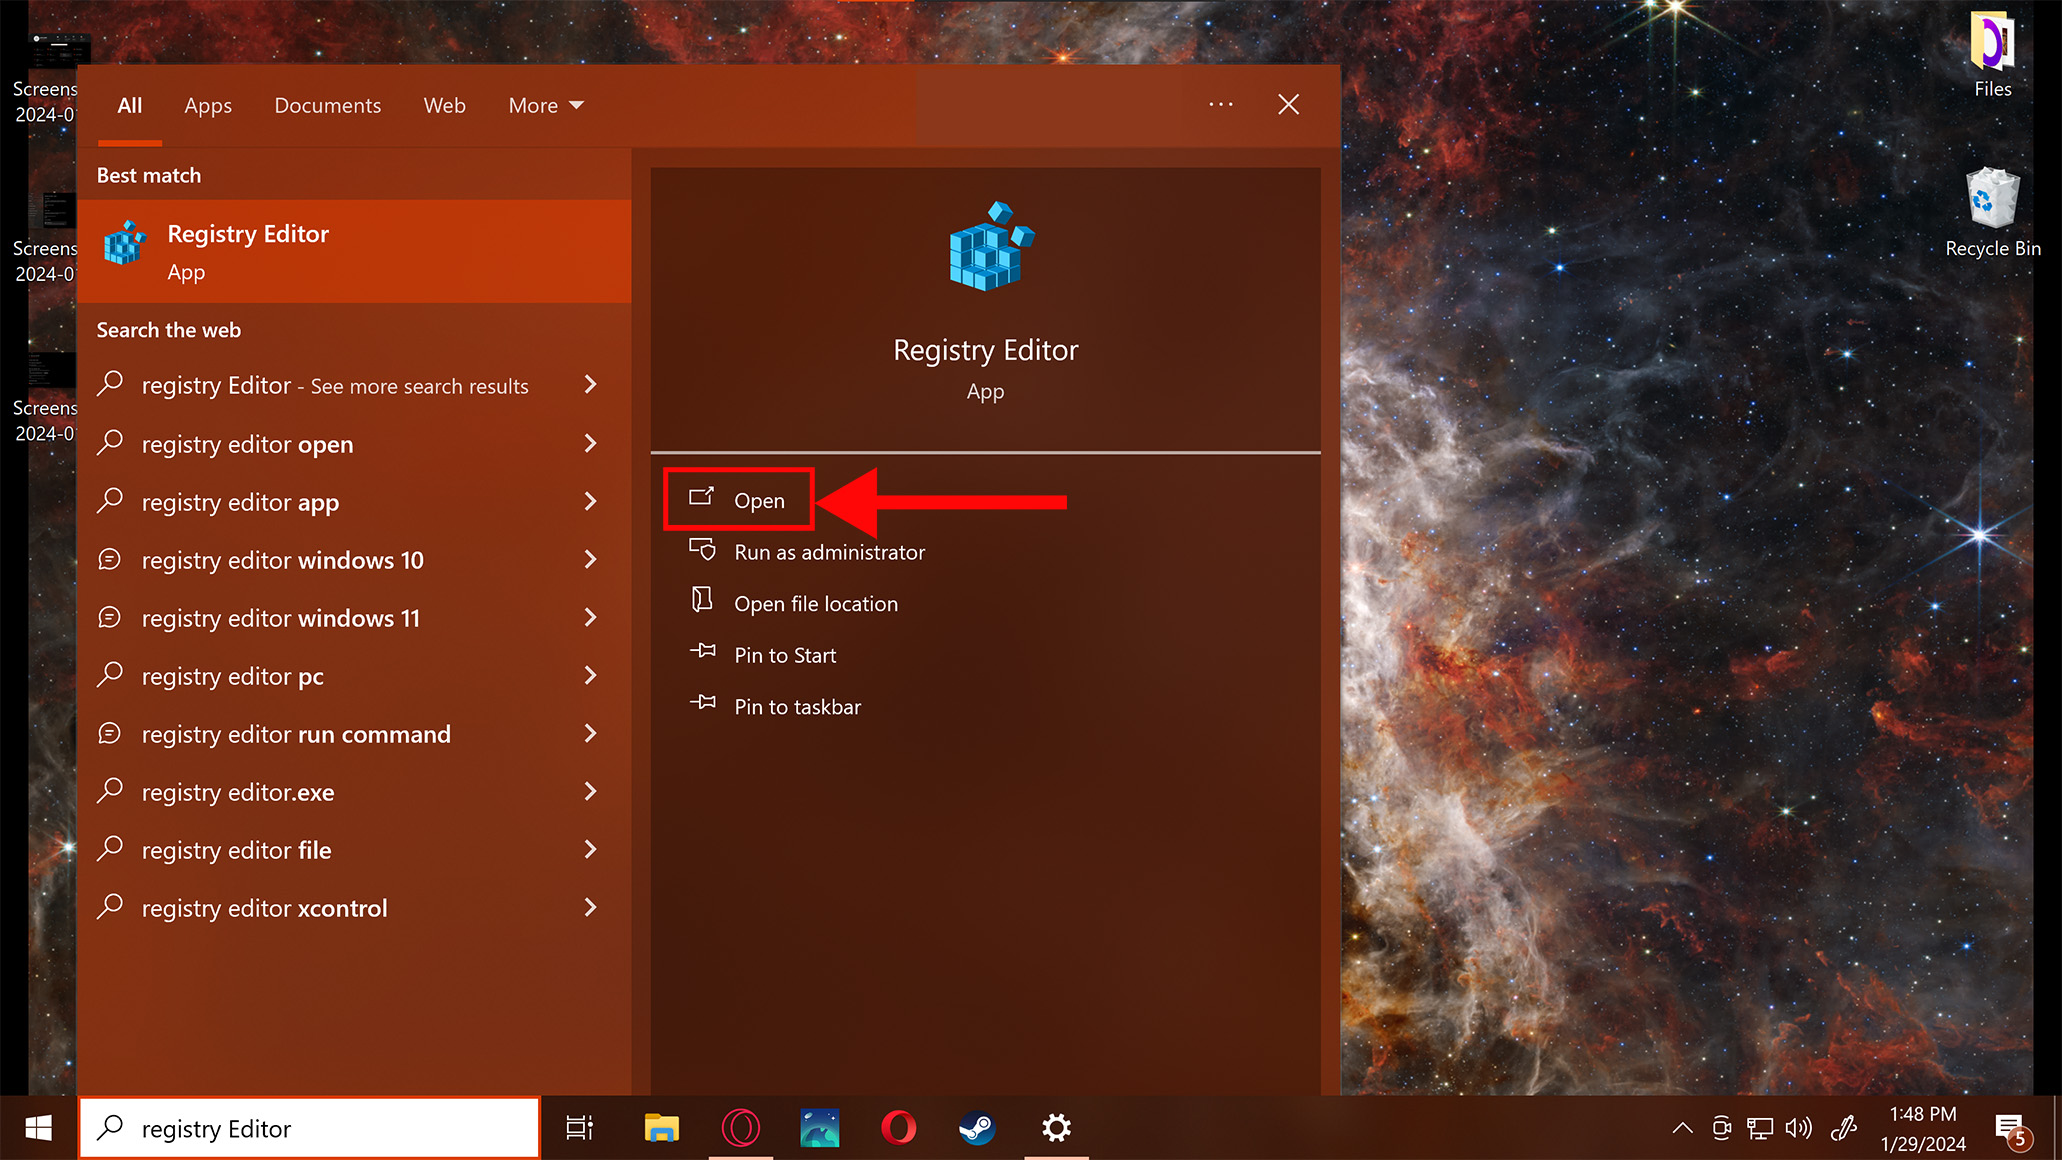 Screenshot of the Windows home screen. In the bottom left, the search box has text that reads “Registry Editor.” A pop-up window with results is shown on the left, and the Registry Editor app is shown on the right. A large red arrow points to the “Open” option that is highlighted by a red rectangle.